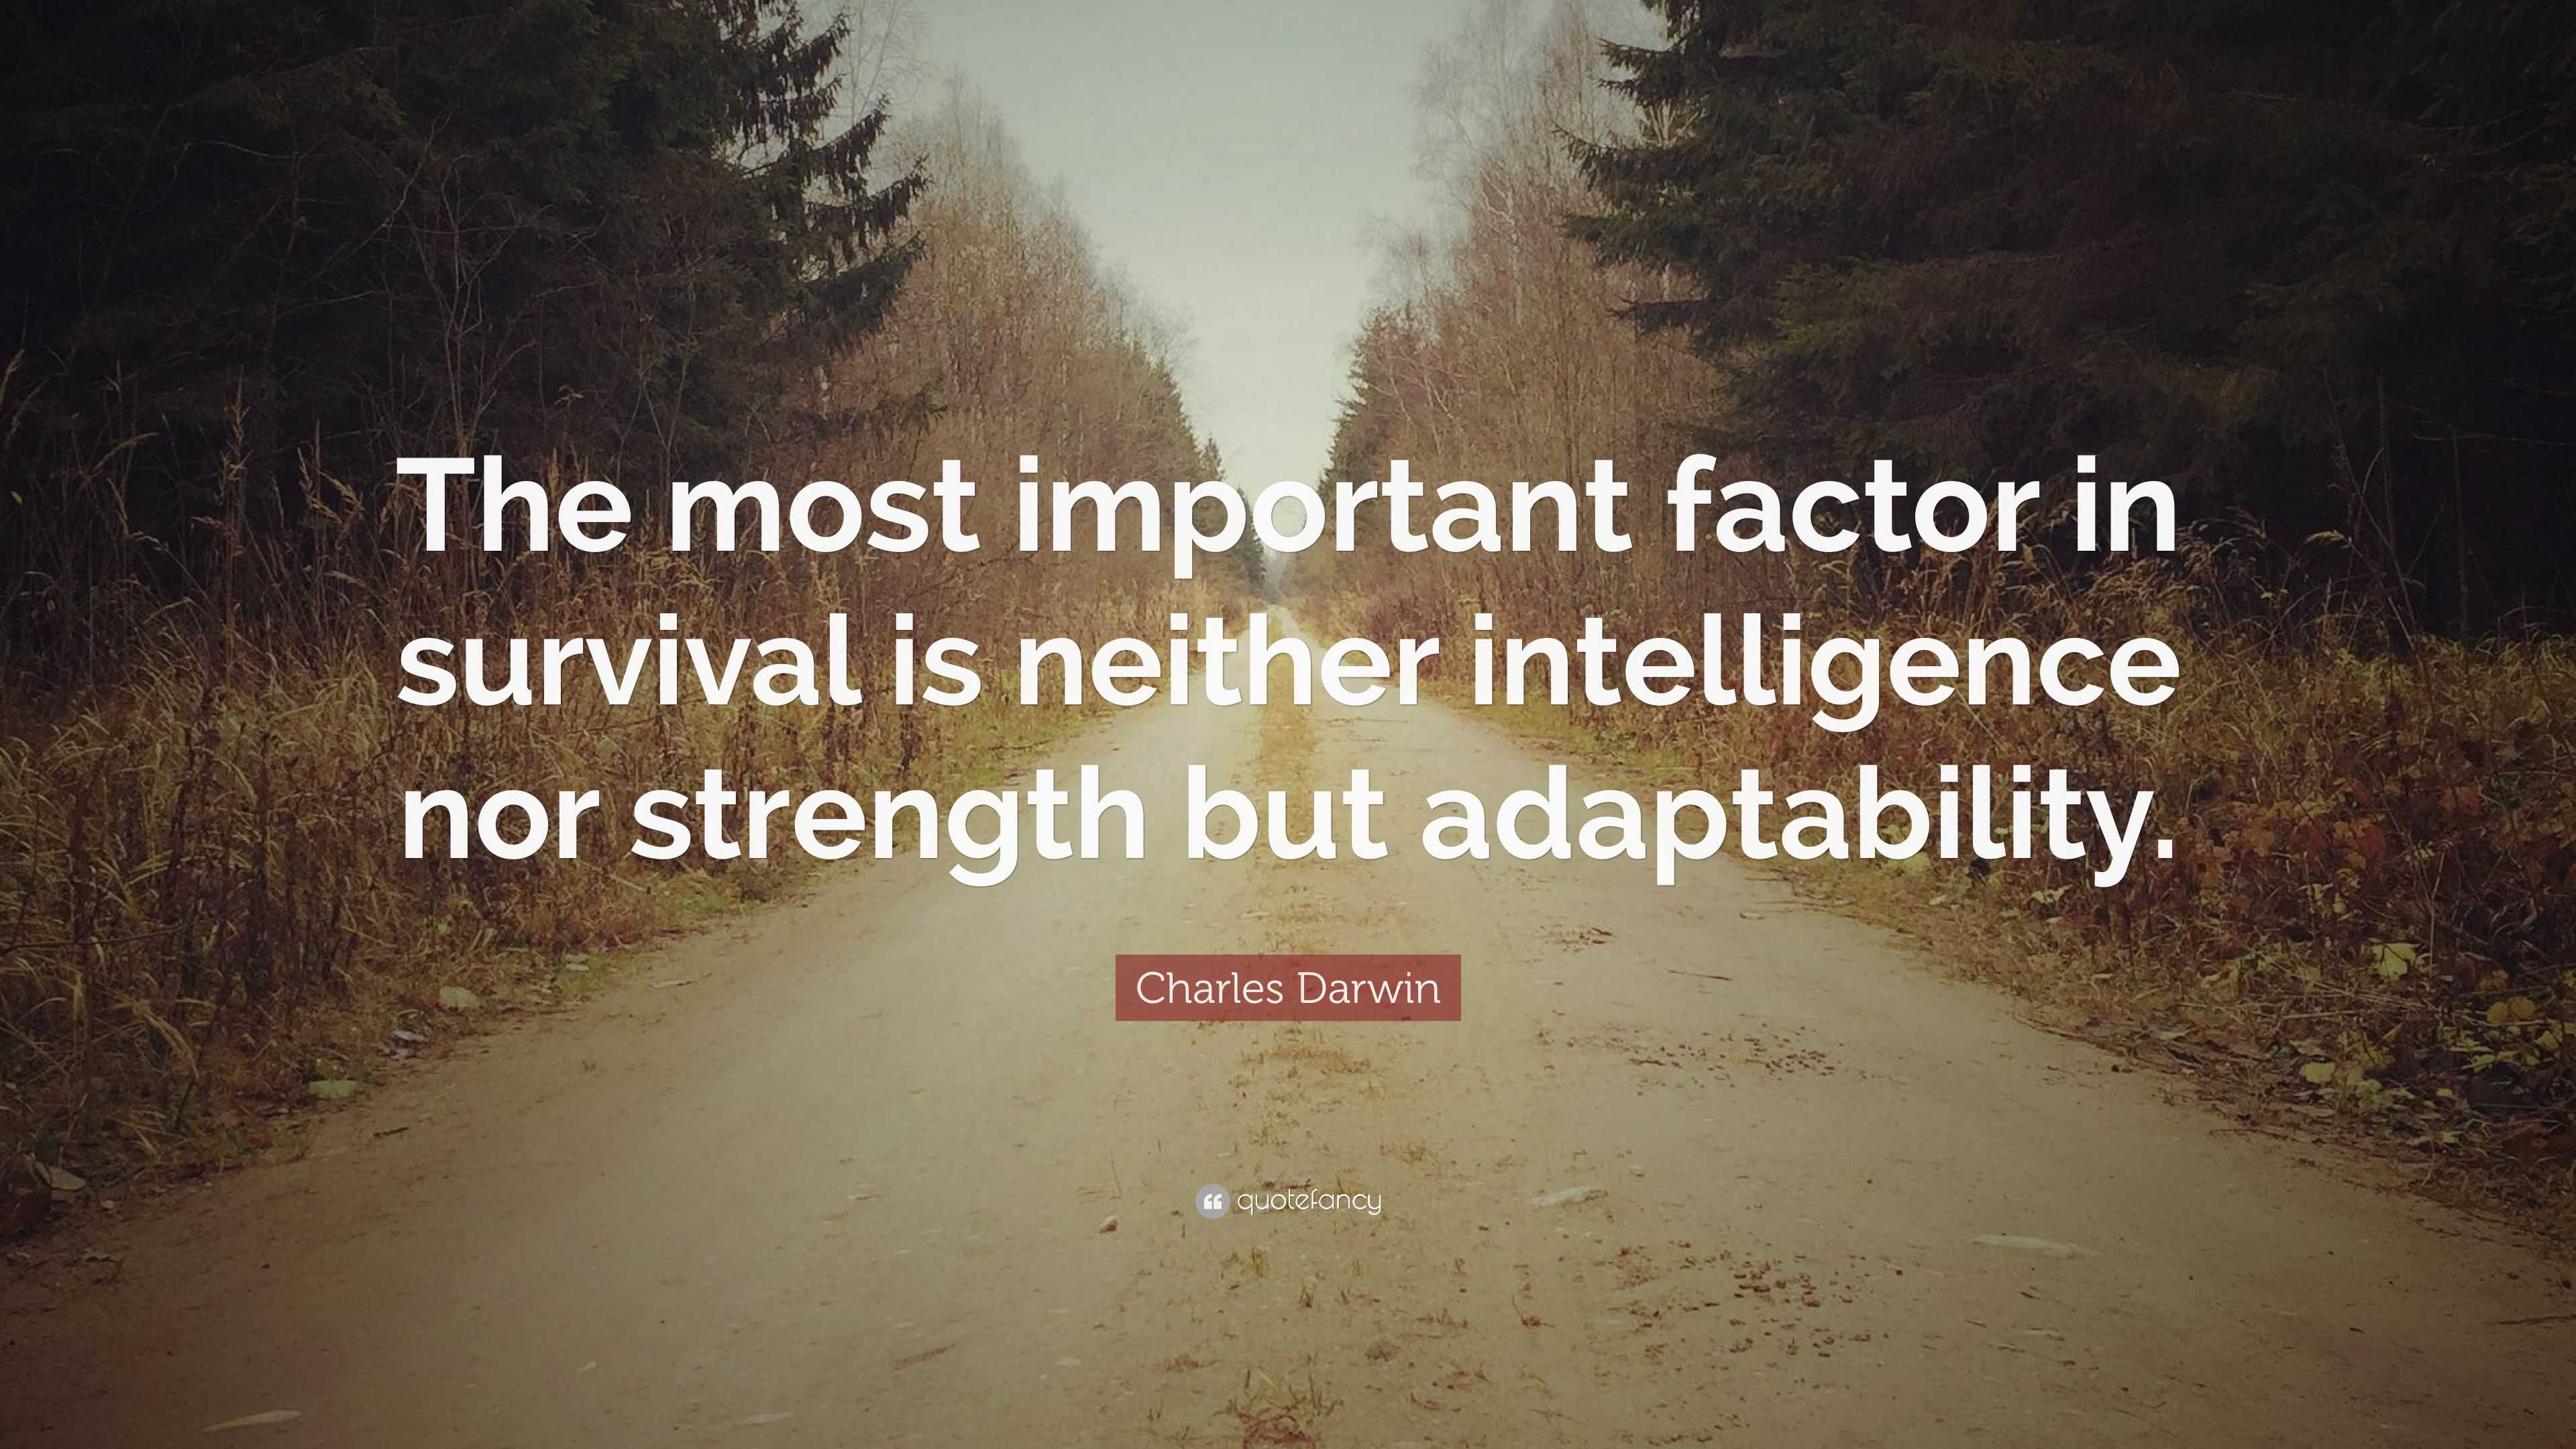 Charles Darwin Quote: “The most important factor in survival is neither intelligence ...3840 x 2160